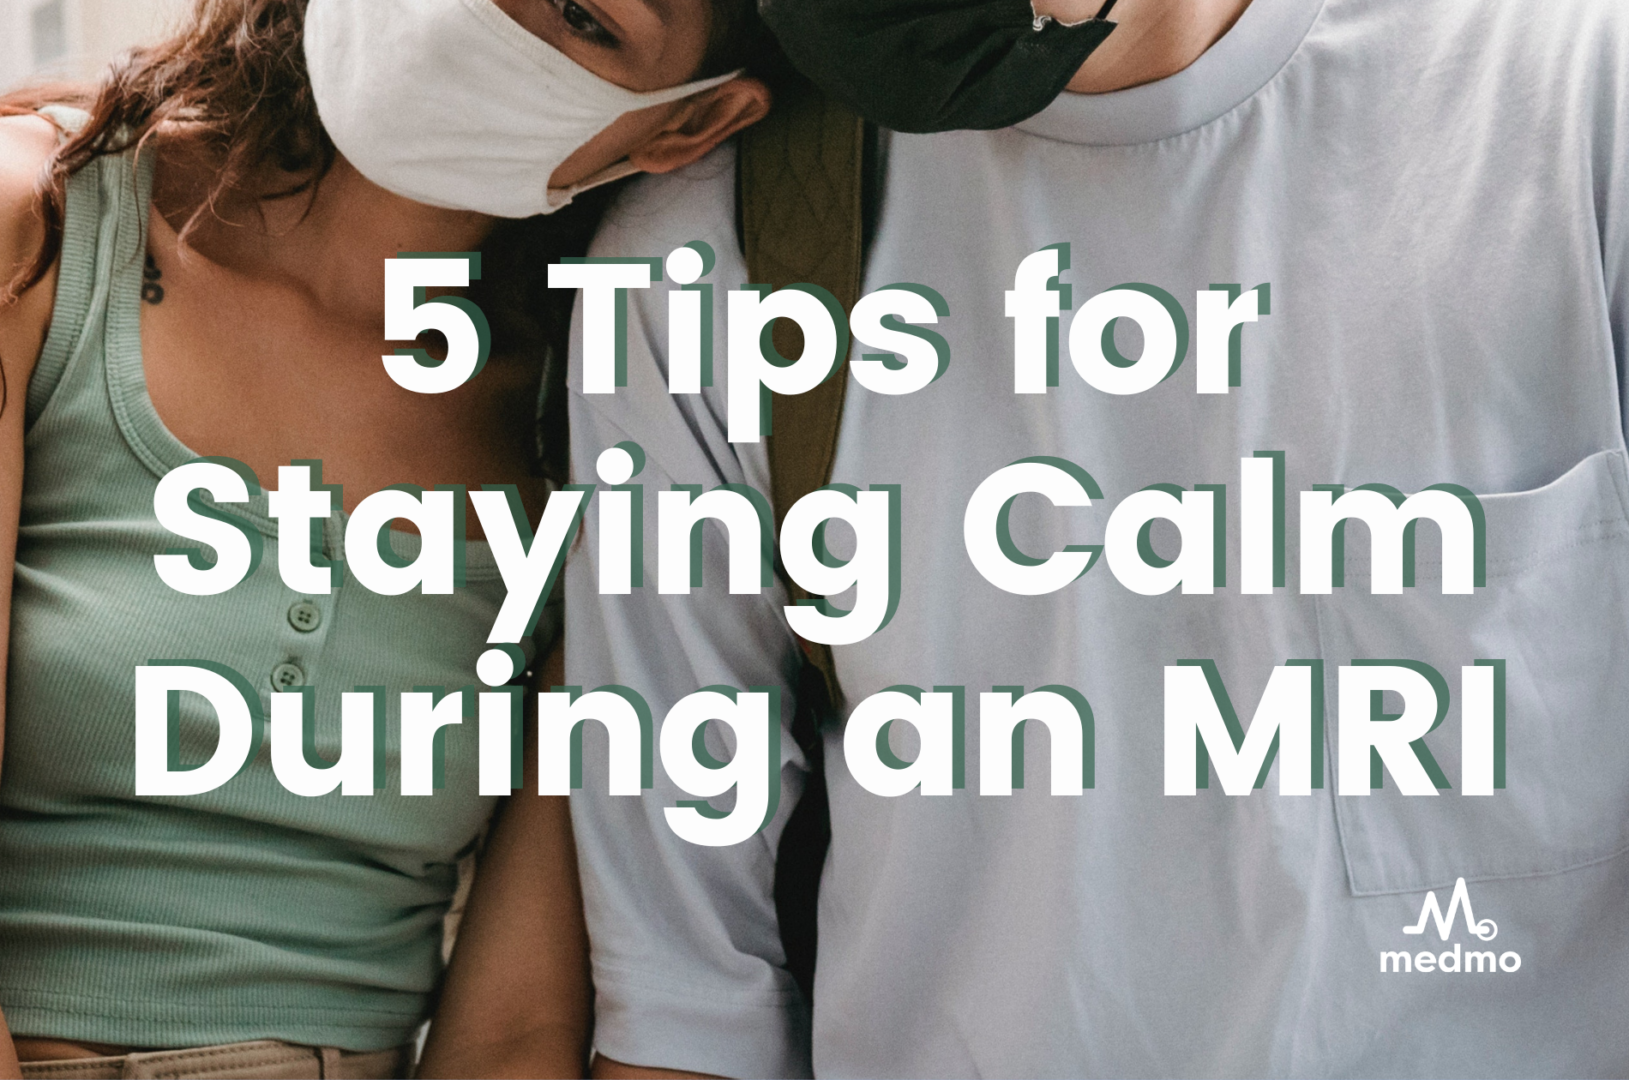 5 Tips for Staying Calm During an MRI